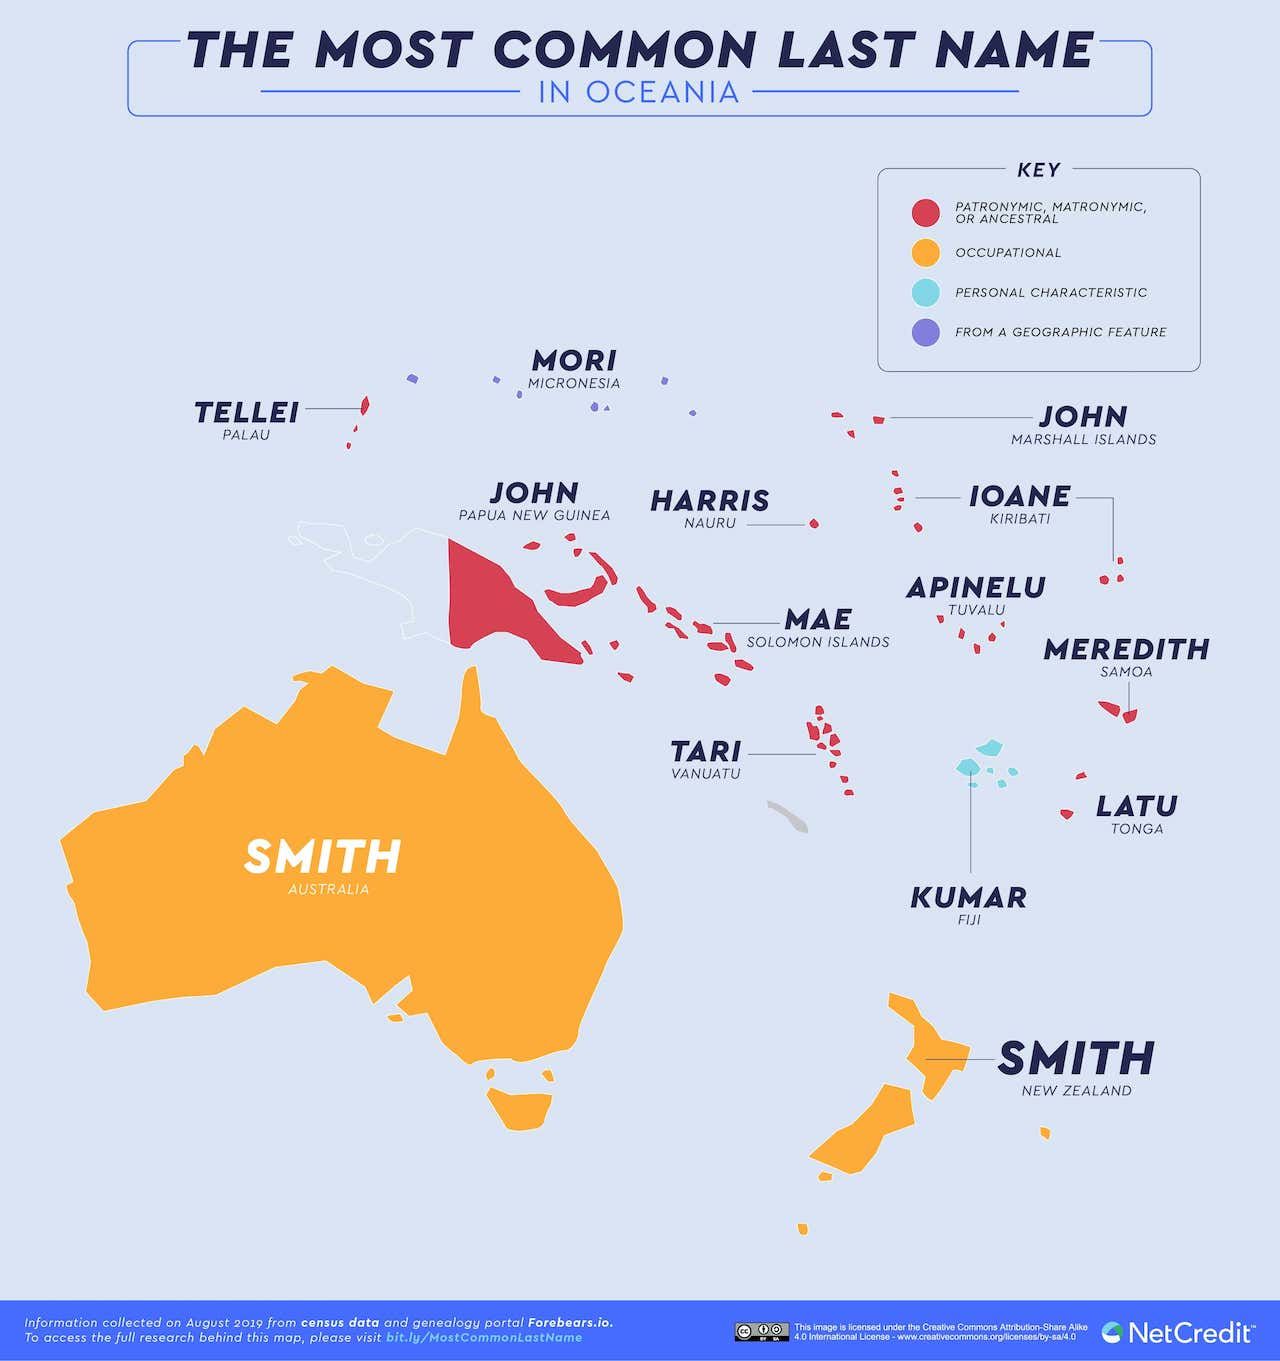 07_The-most-common-last-name-in-every-country_Oceania.jpg